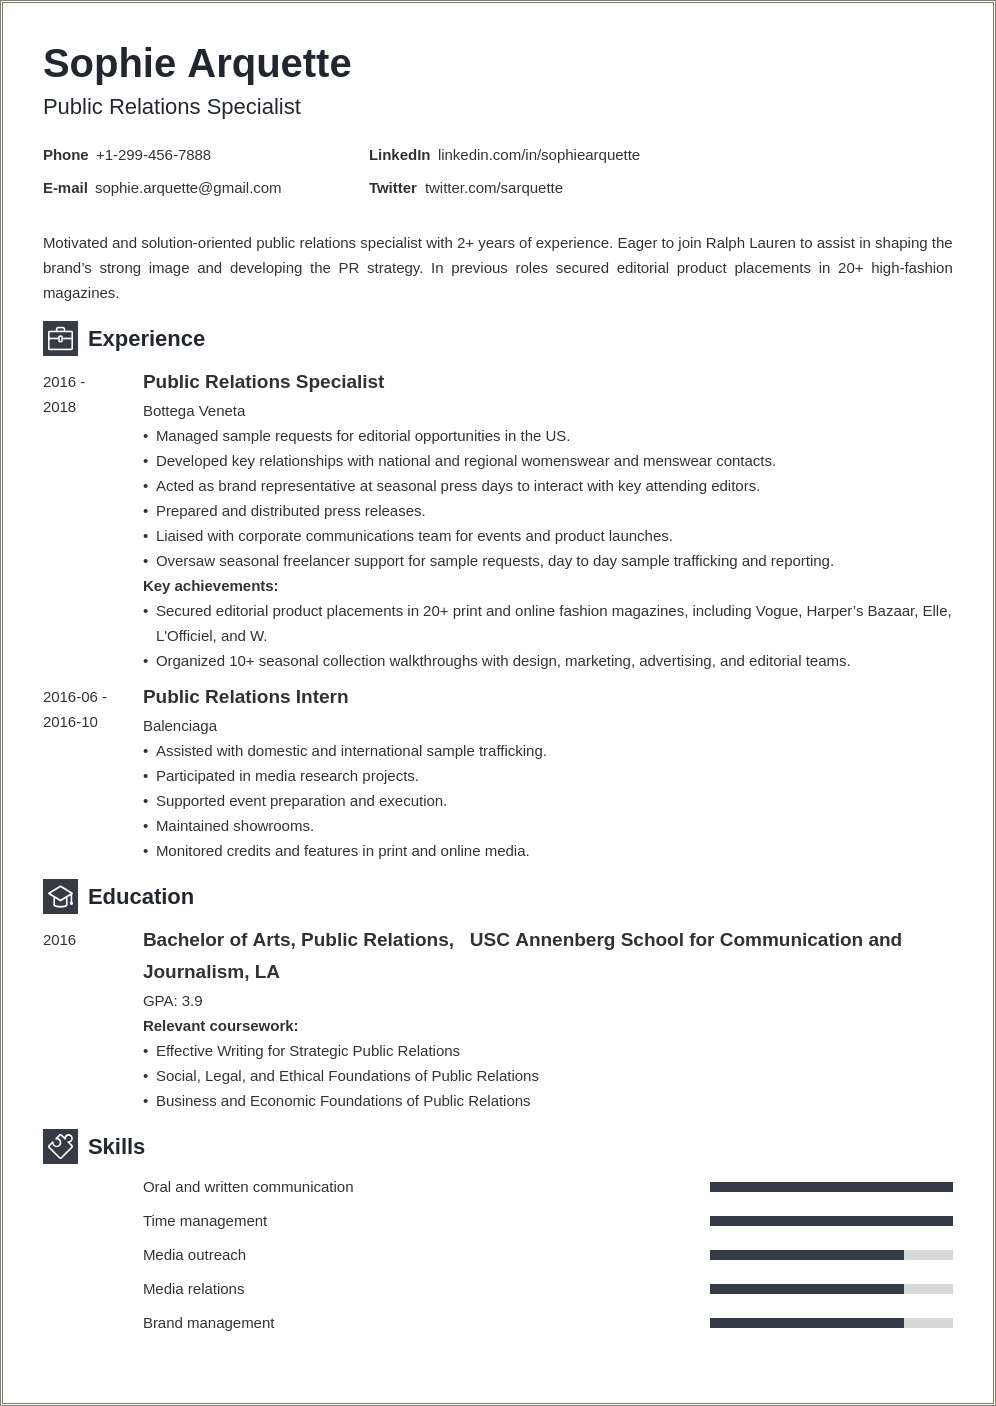 Resume Objective For Public Relations Internship